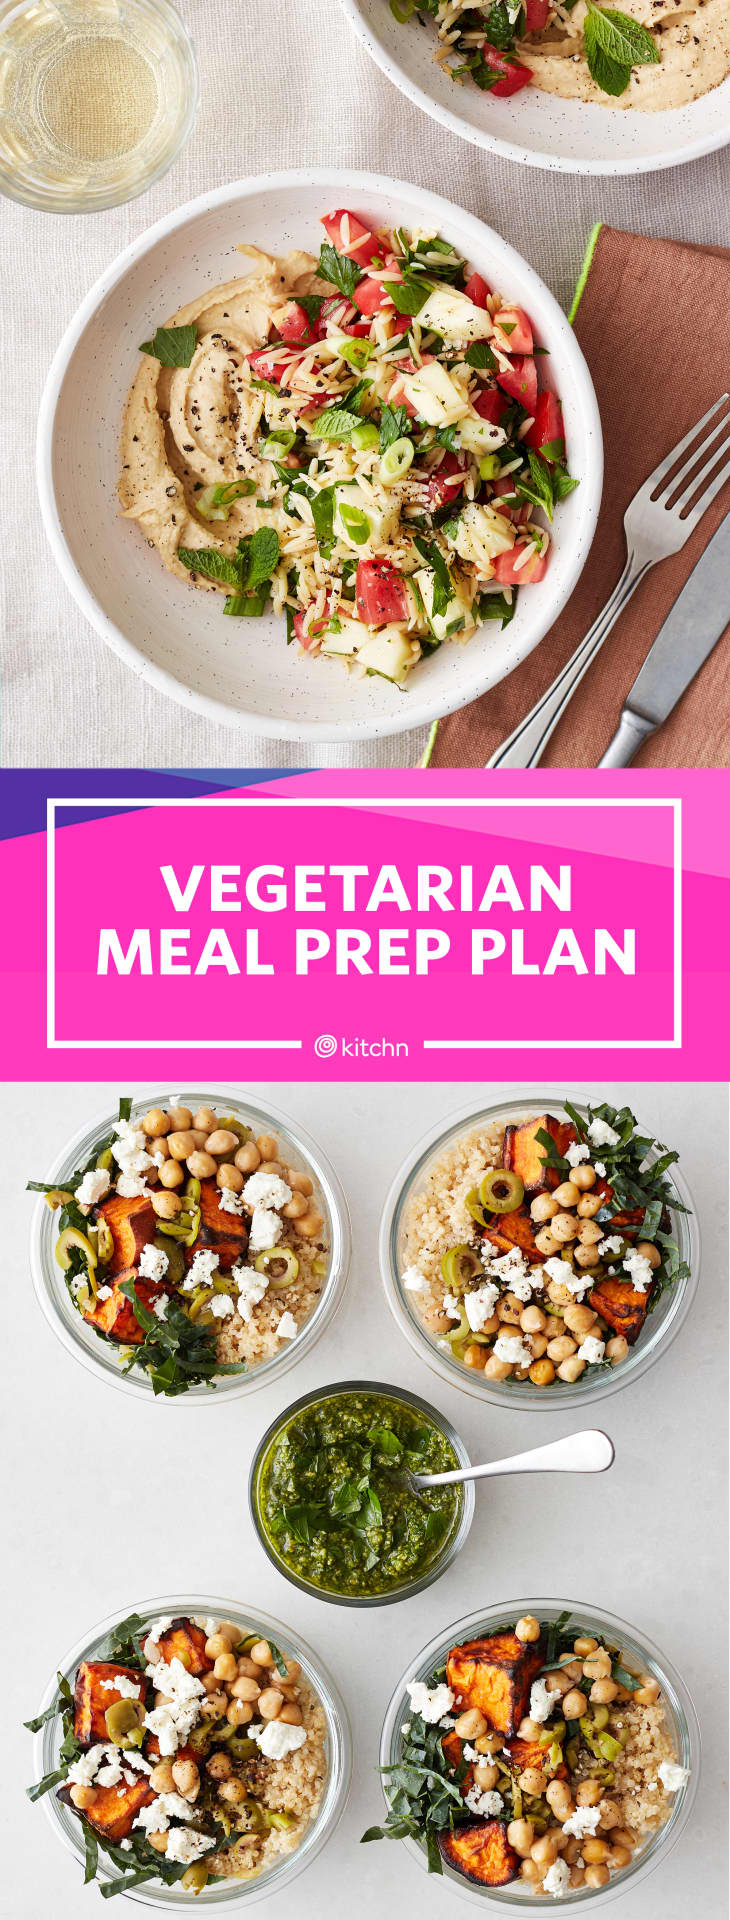 How to Prep a Week of Meatless Meals | The Kitchn